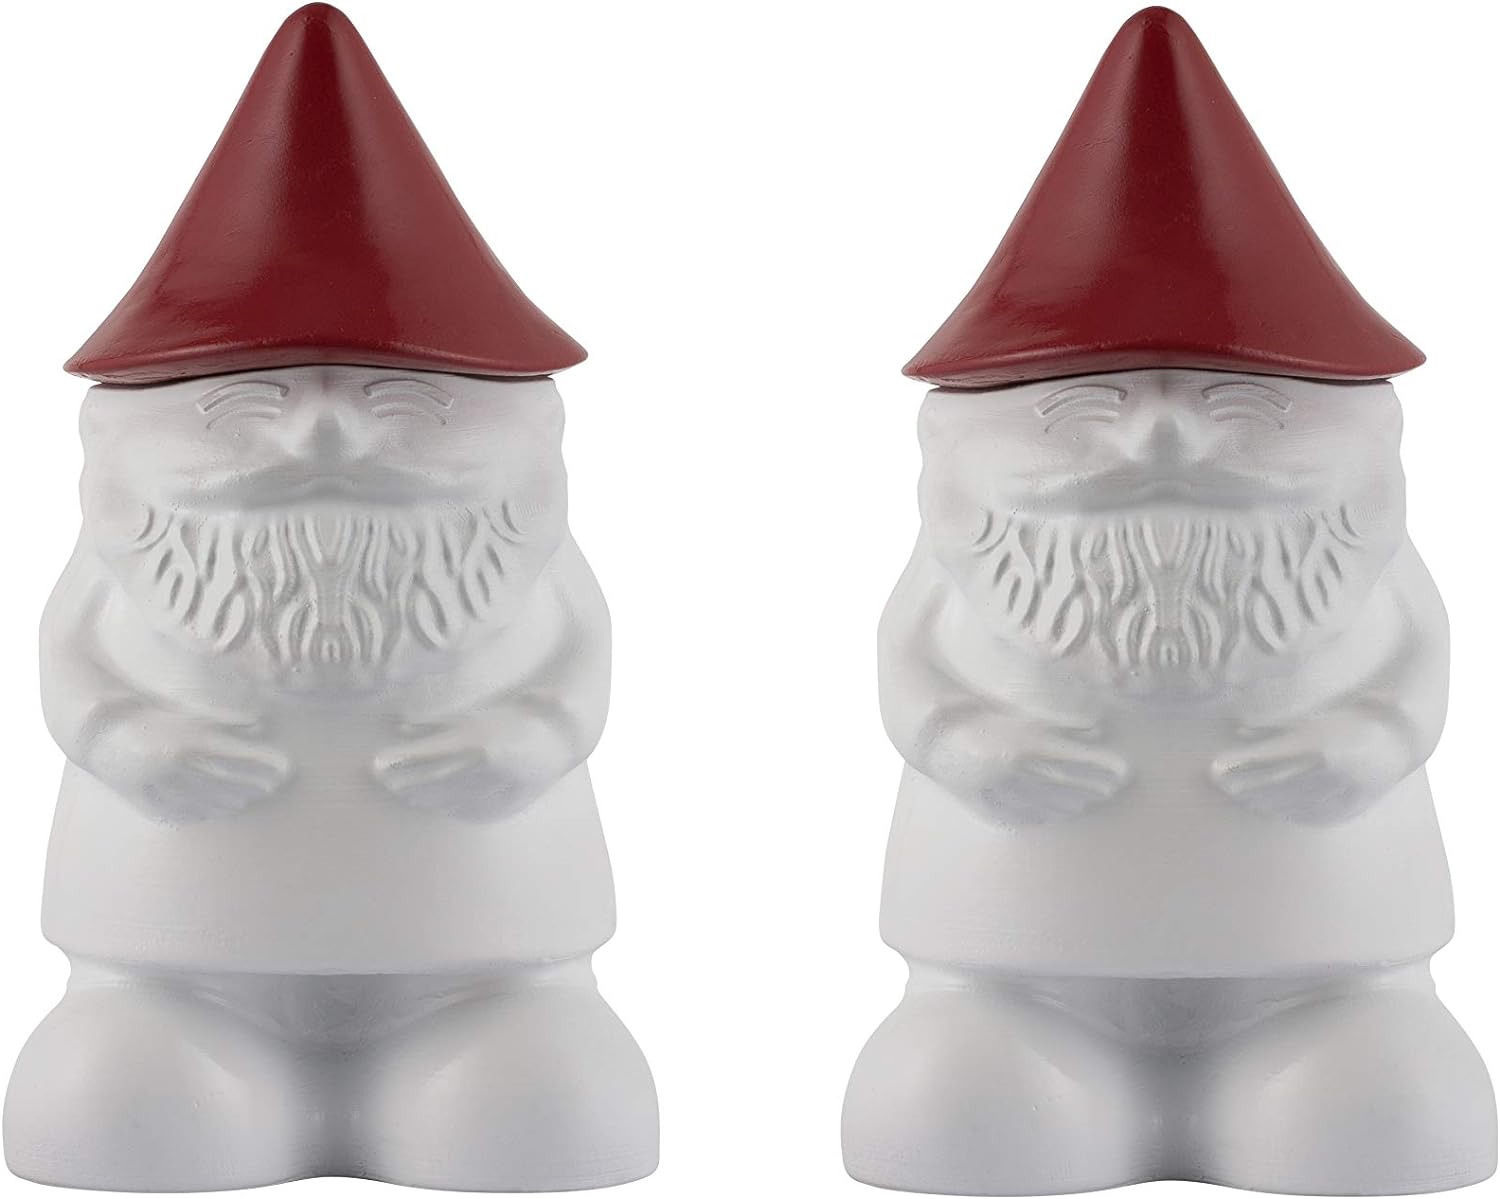 TIKI Brand 2-Pack Decorative Gnome Table Torch, for Outdoor Lighting in Patio, Backyard, 7 Inch, Red and White, 1120166